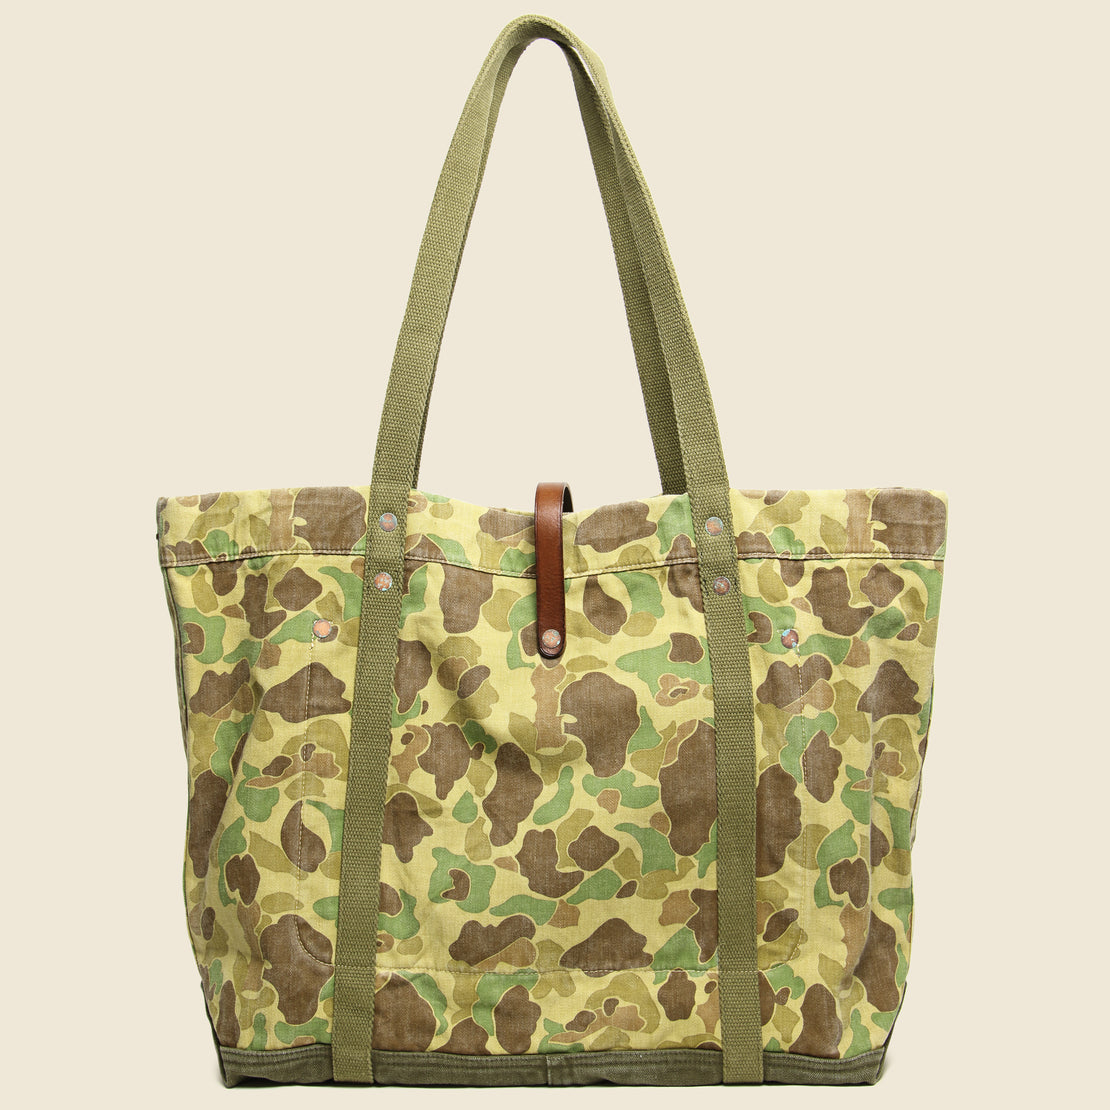 The Bucket Bag in Spruce Camo, Bags & Accessories